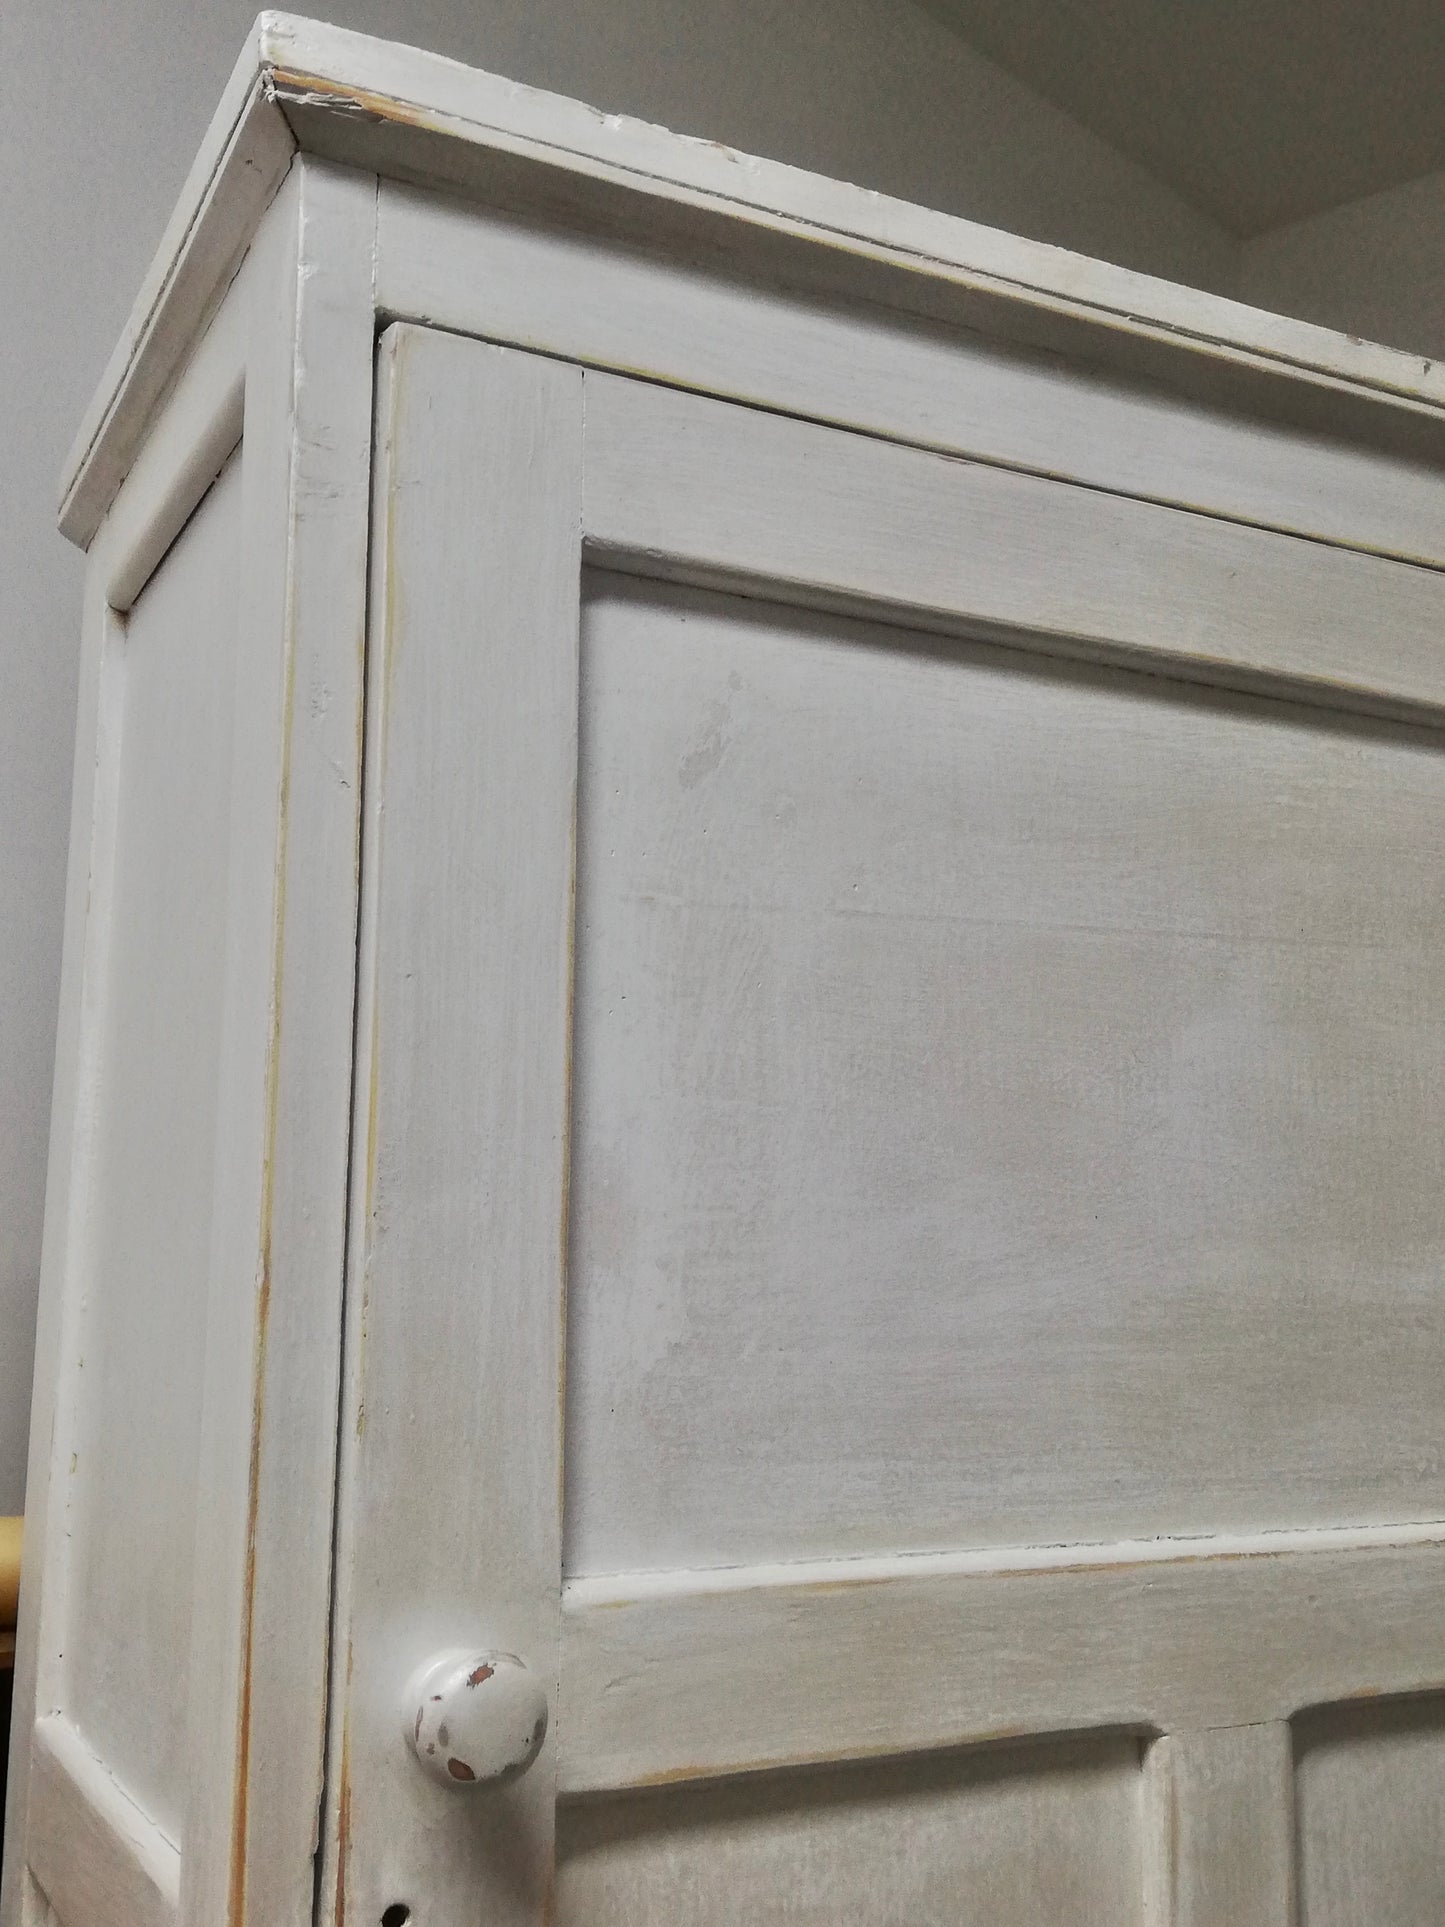 Vintage pantry cupboard painted in casement white and pearl metallic